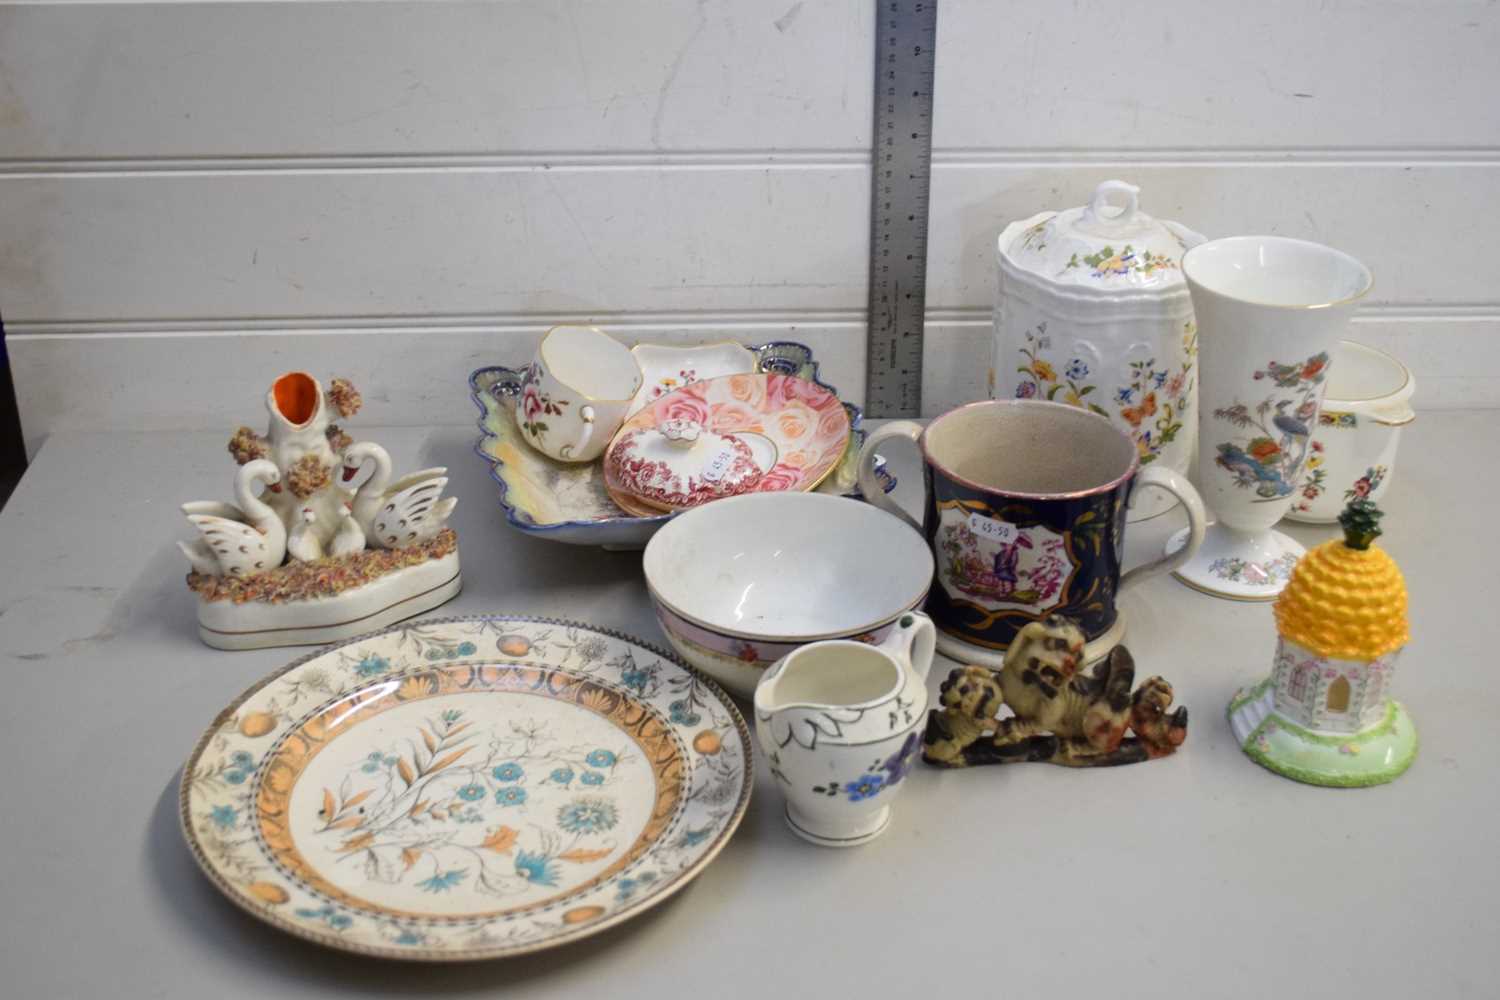 MIXED LOT COMPRISING A STAFFORDSHIRE SPILL VASE DECORATED WITH A FAMILY OF SWANS, DECORATEDF PLATES,